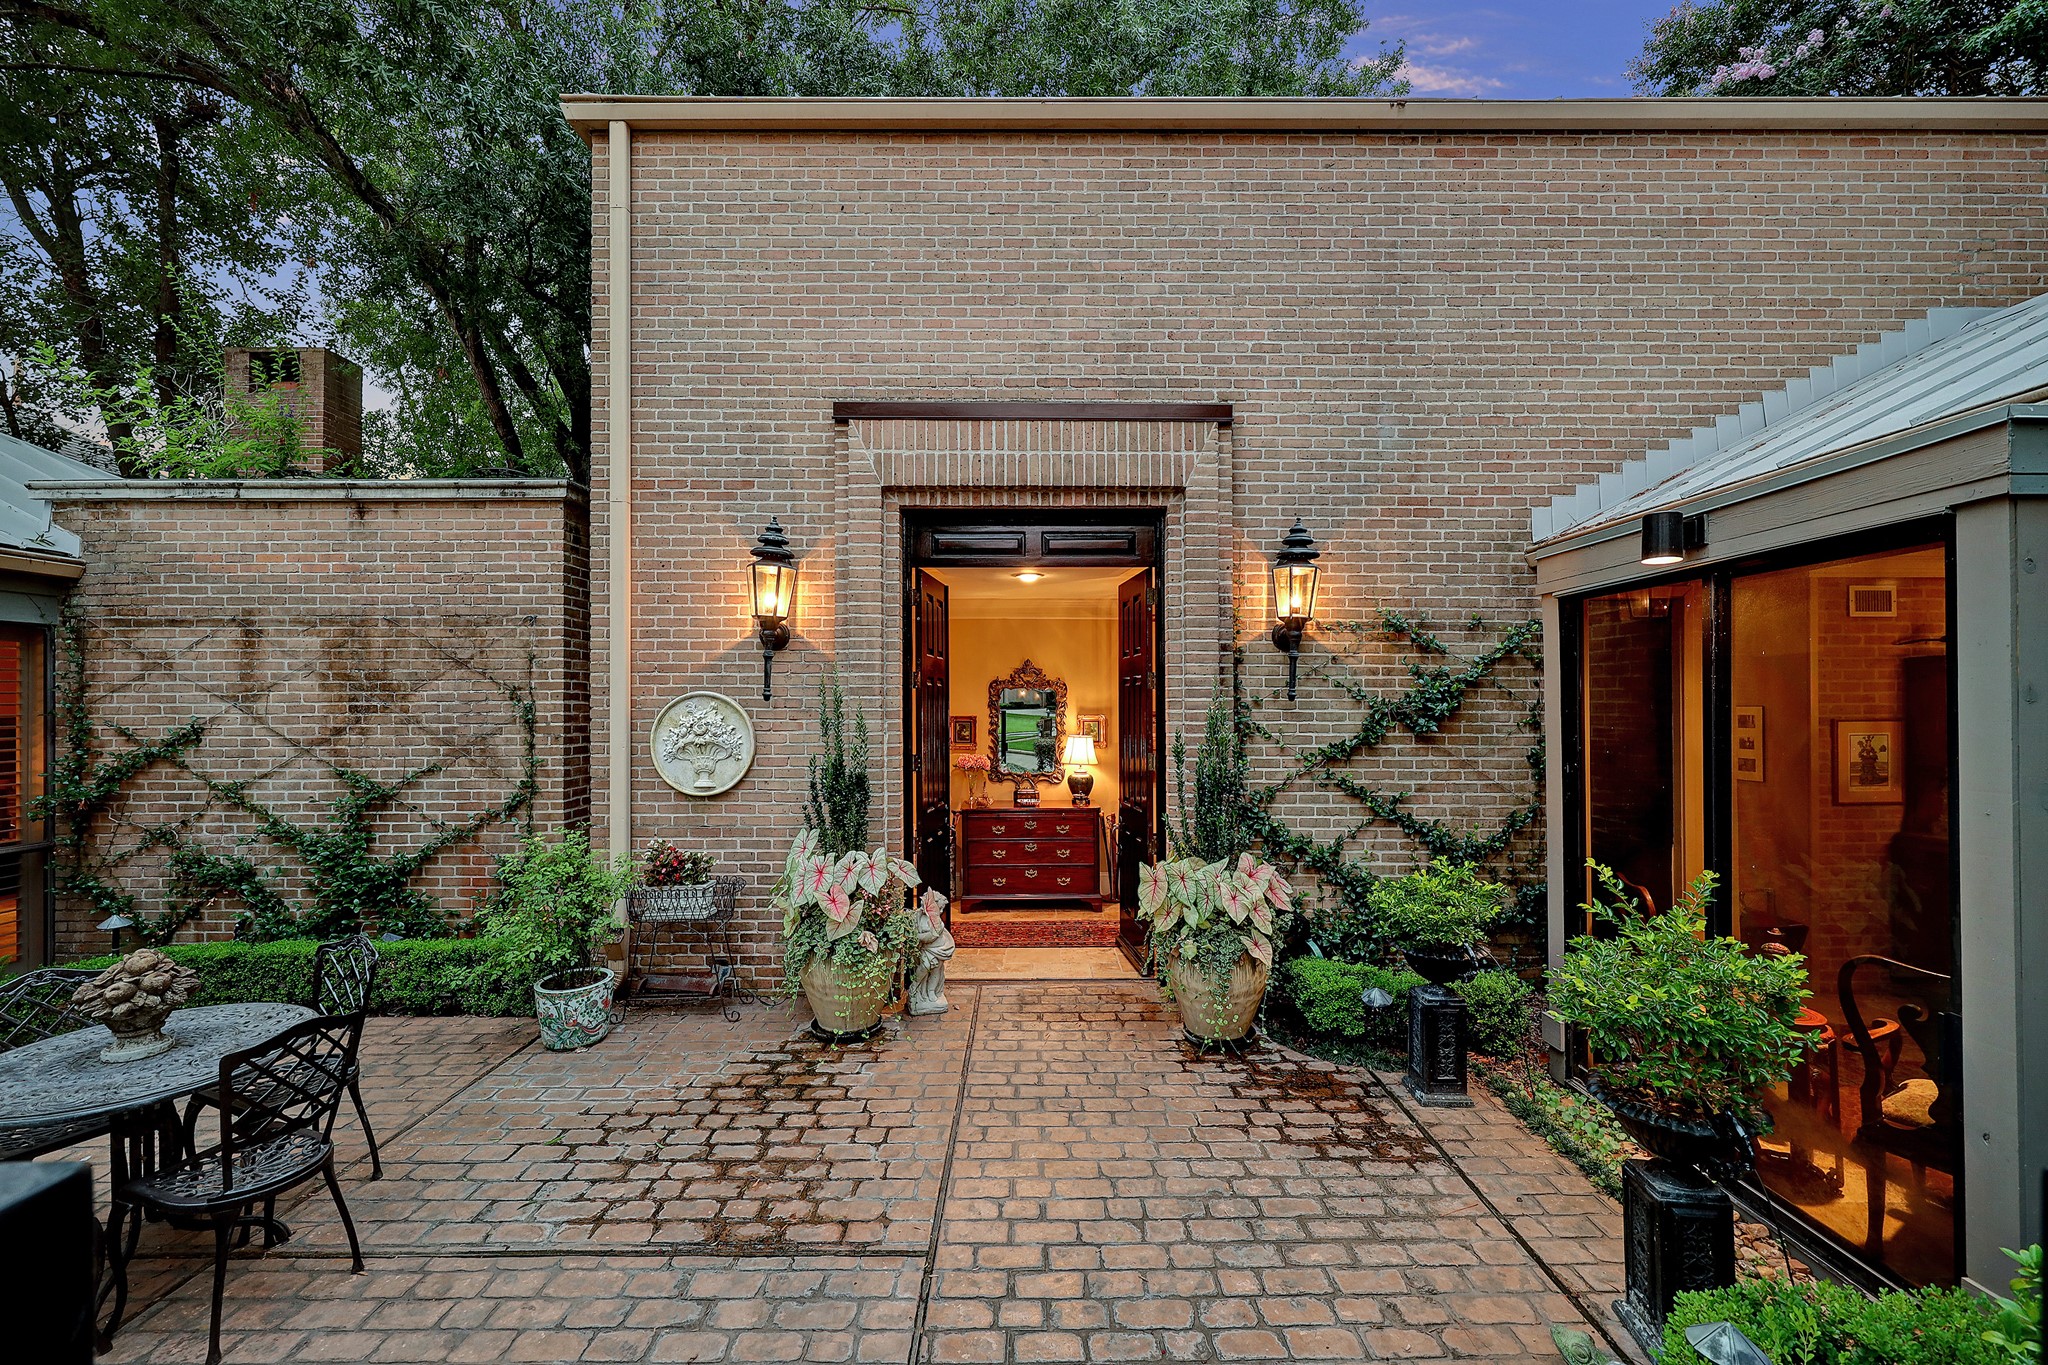 Private courtyard with massive solid wood double door entry to home.